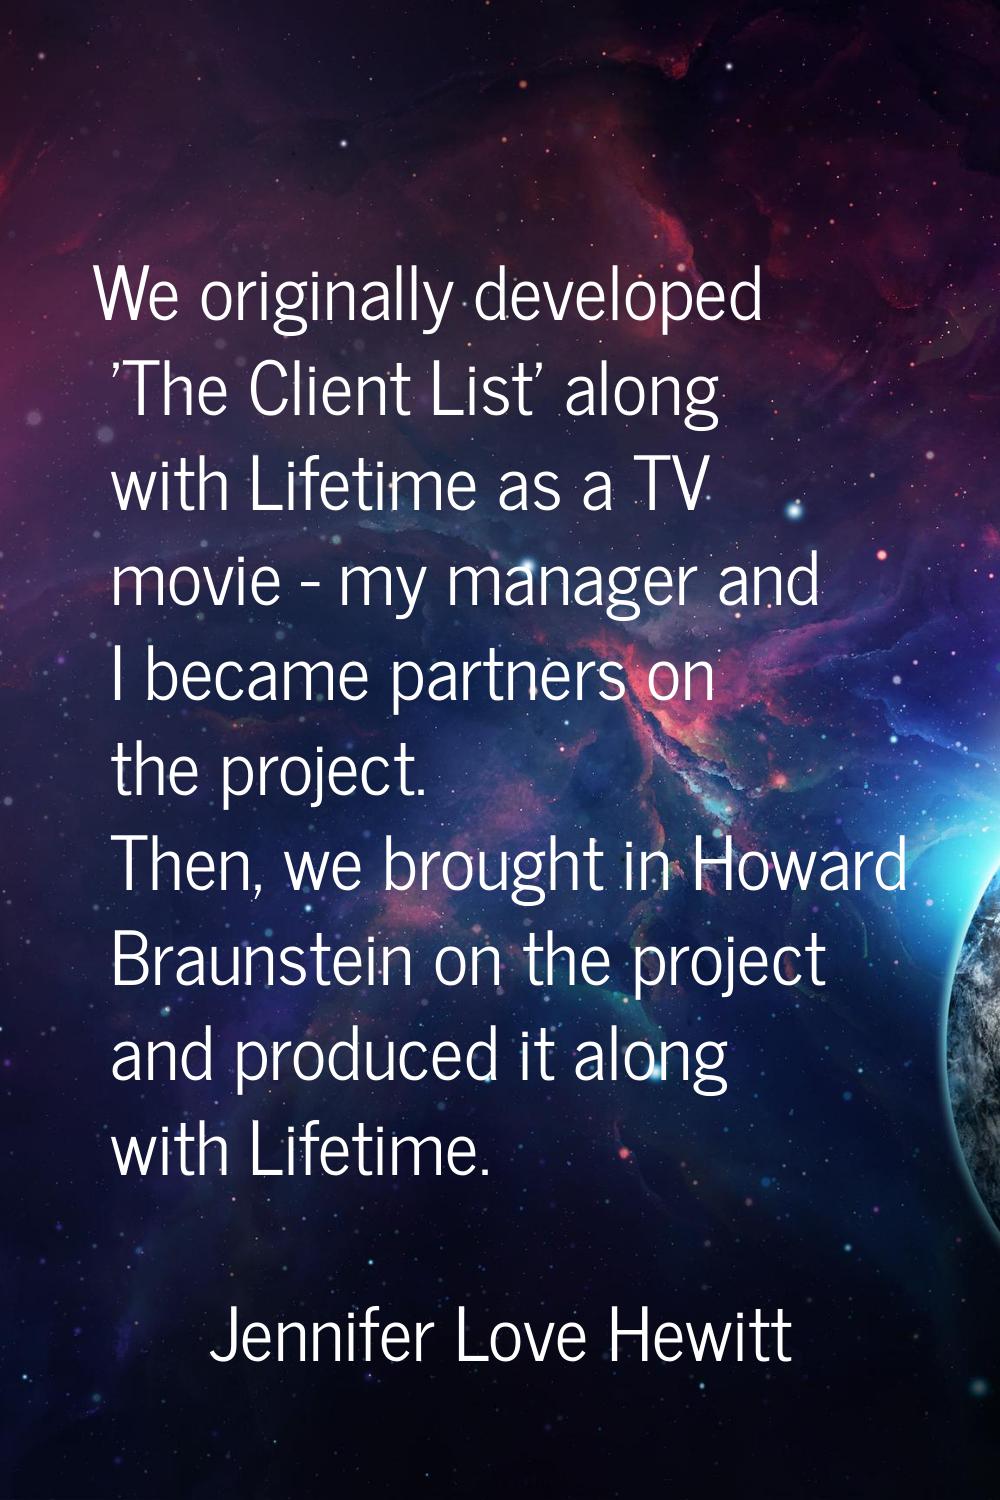 We originally developed 'The Client List' along with Lifetime as a TV movie - my manager and I beca